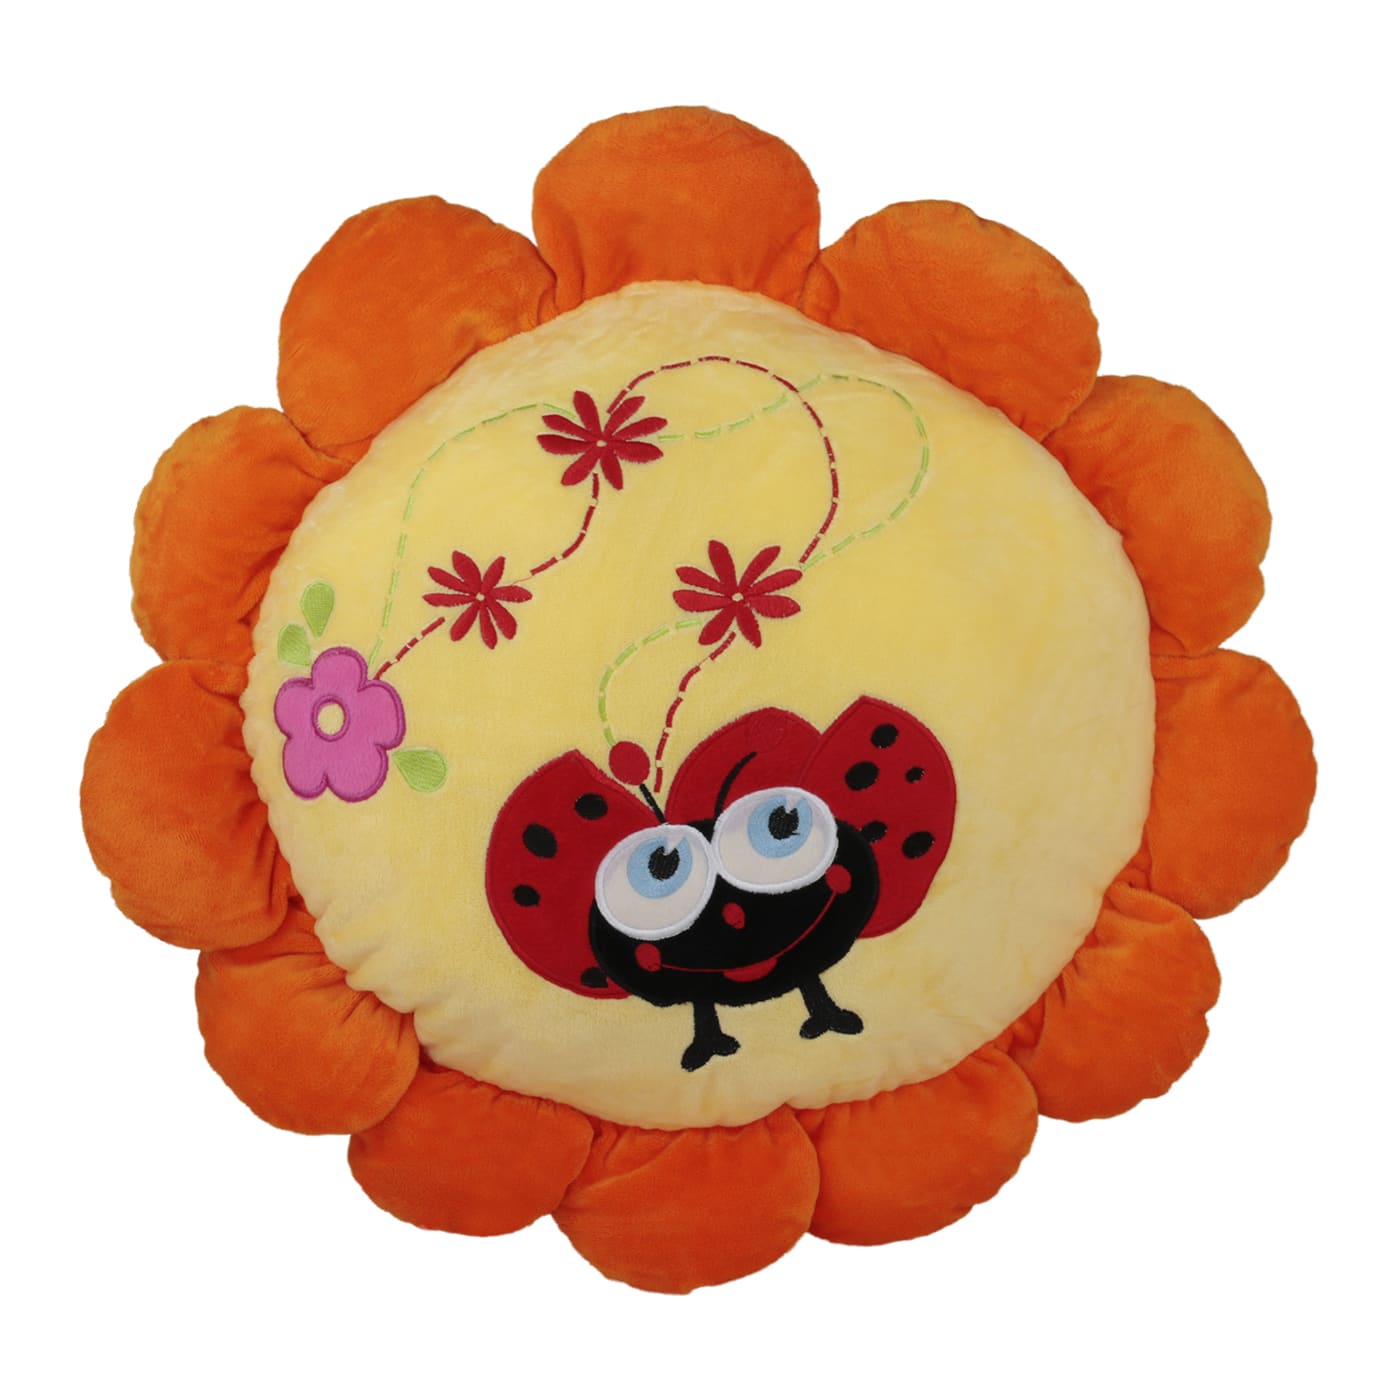 Flower pillow with ladybug